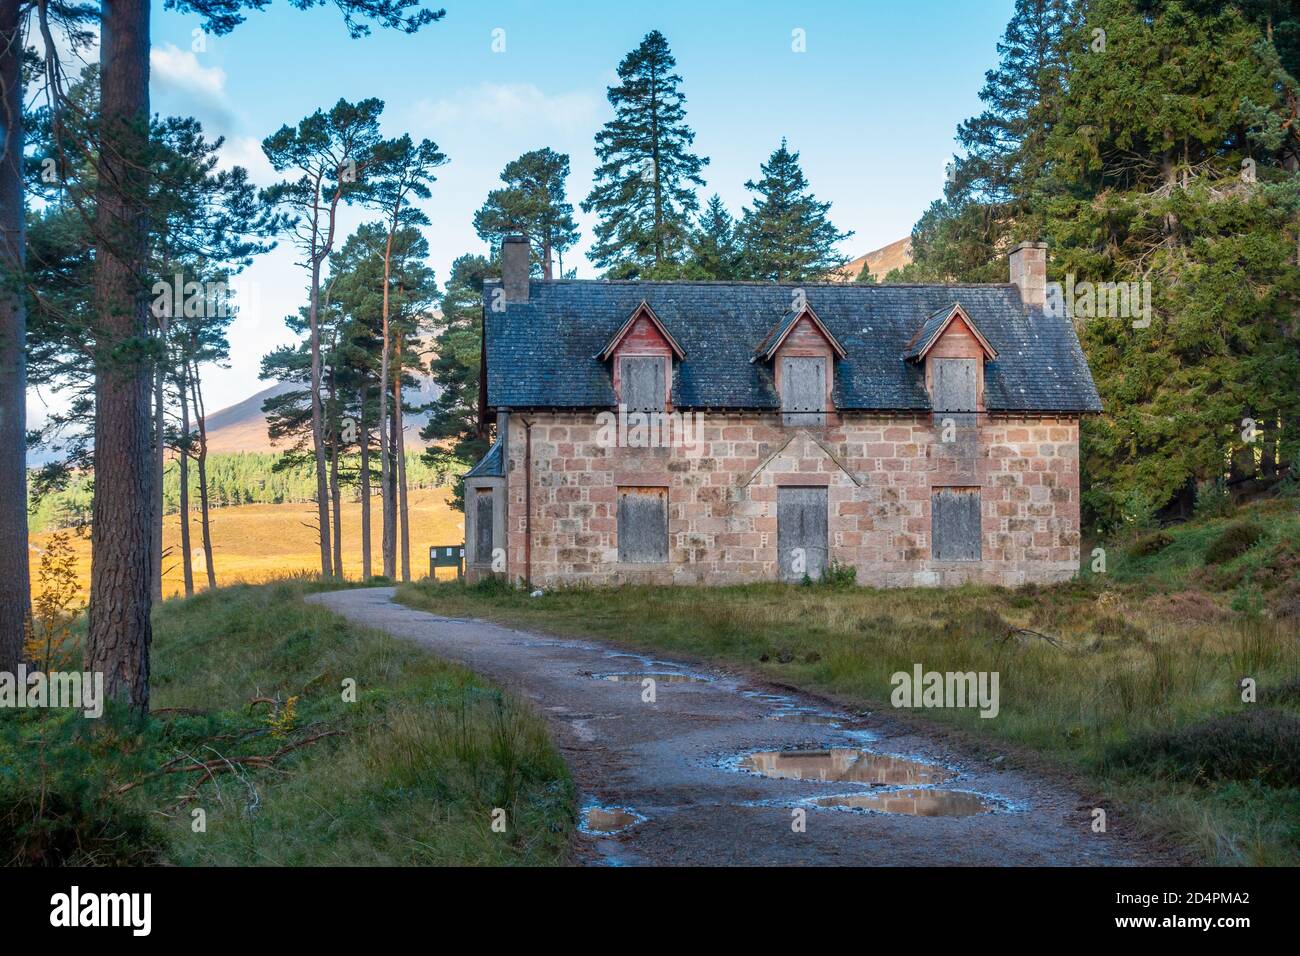 The boarded up building of Derry Lodge near Braemar in Aberdeenshire, Scotland, UK Stock Photo